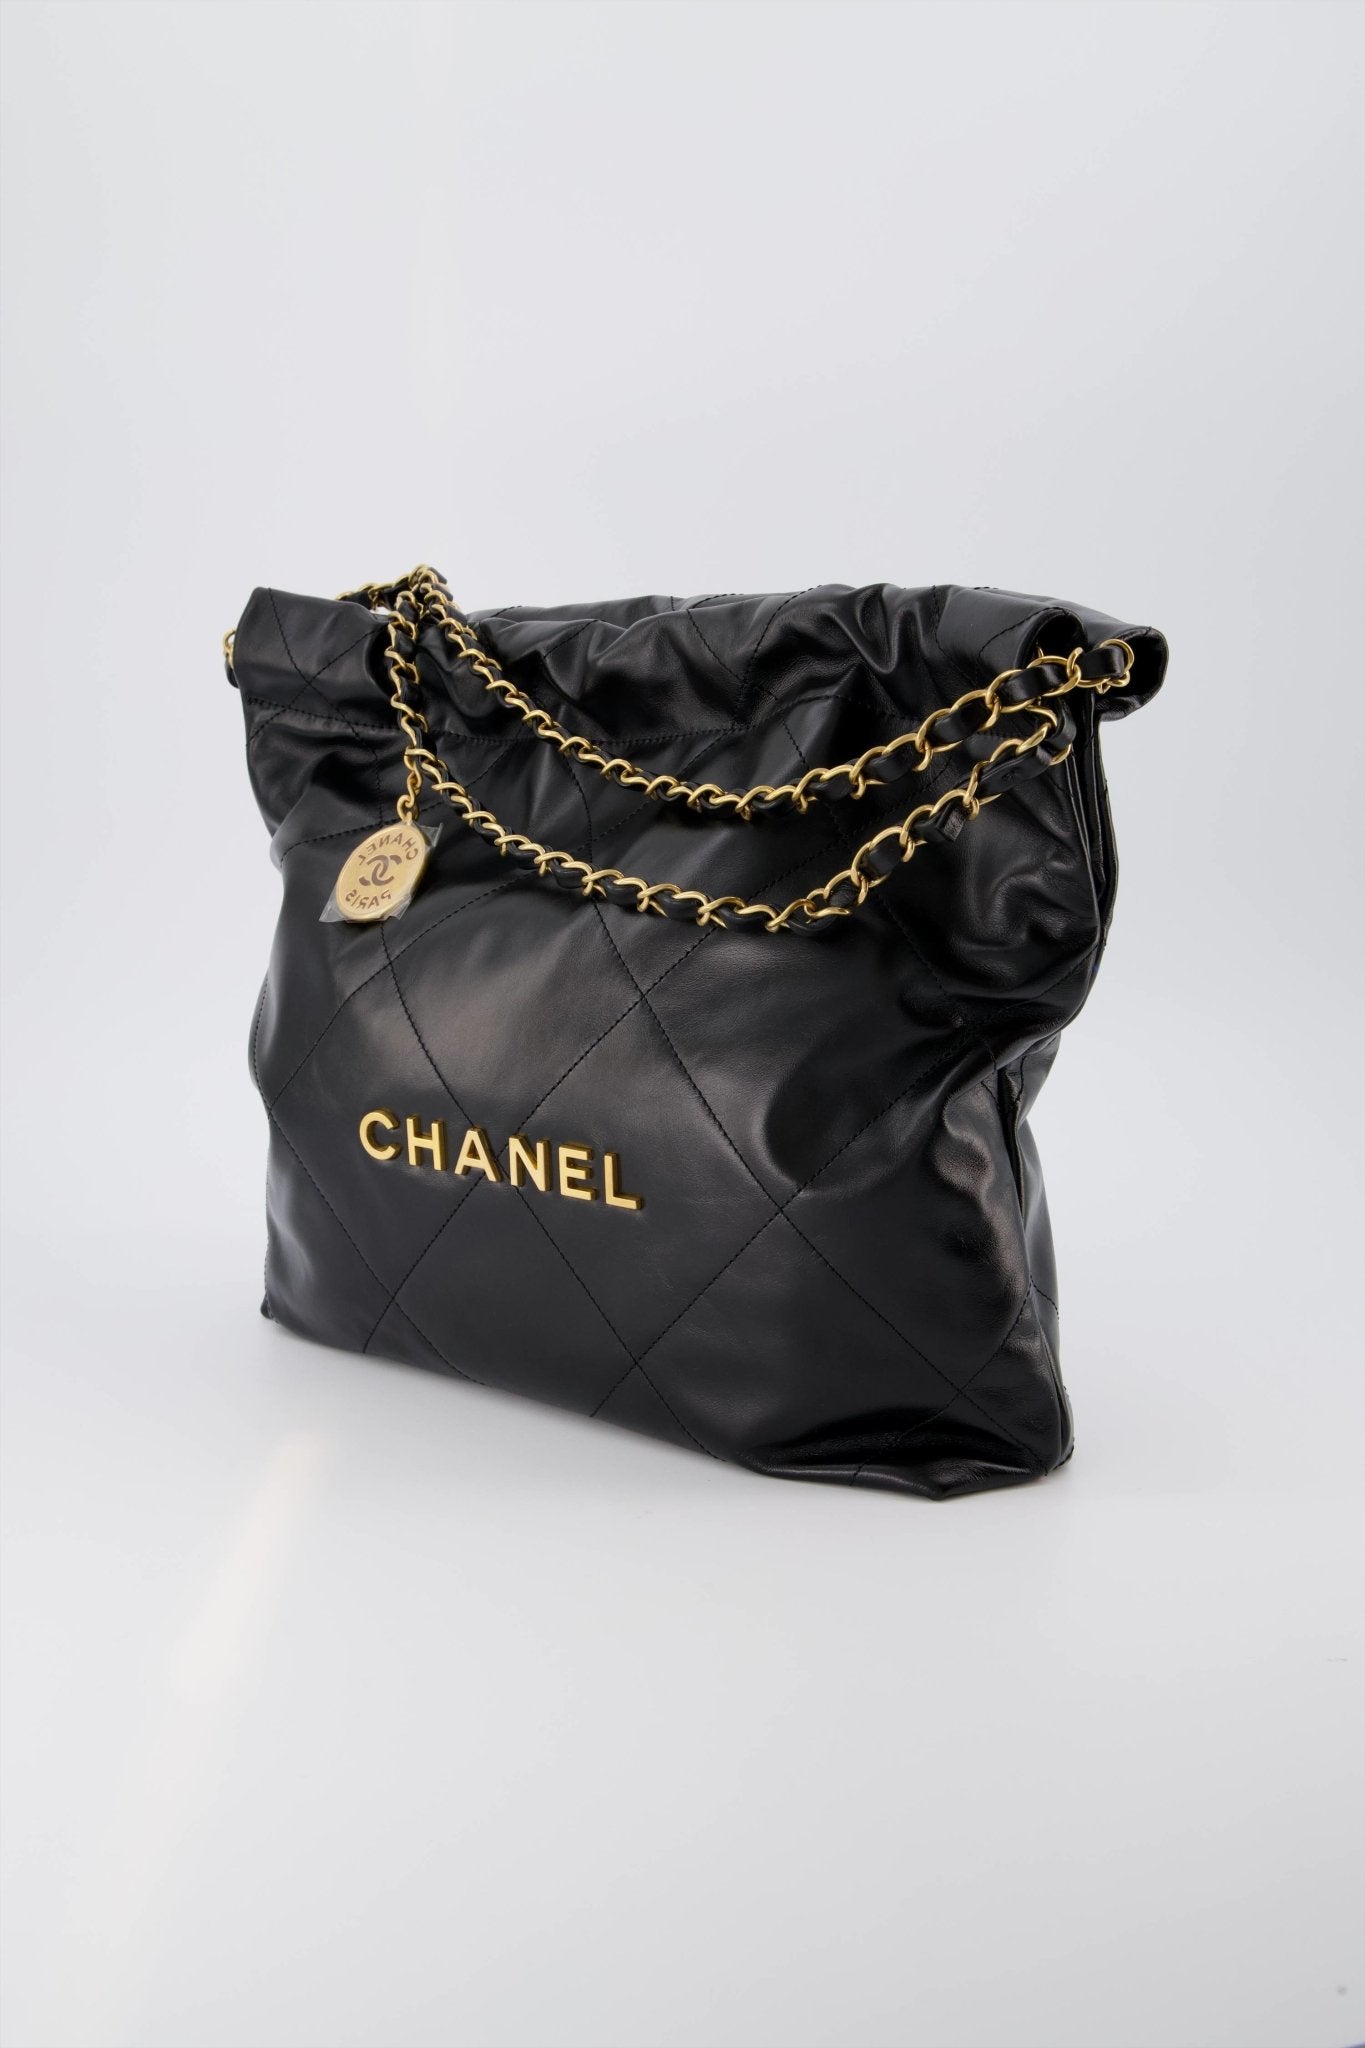 Chanel Authenticated Chanel 22 Leather Handbag